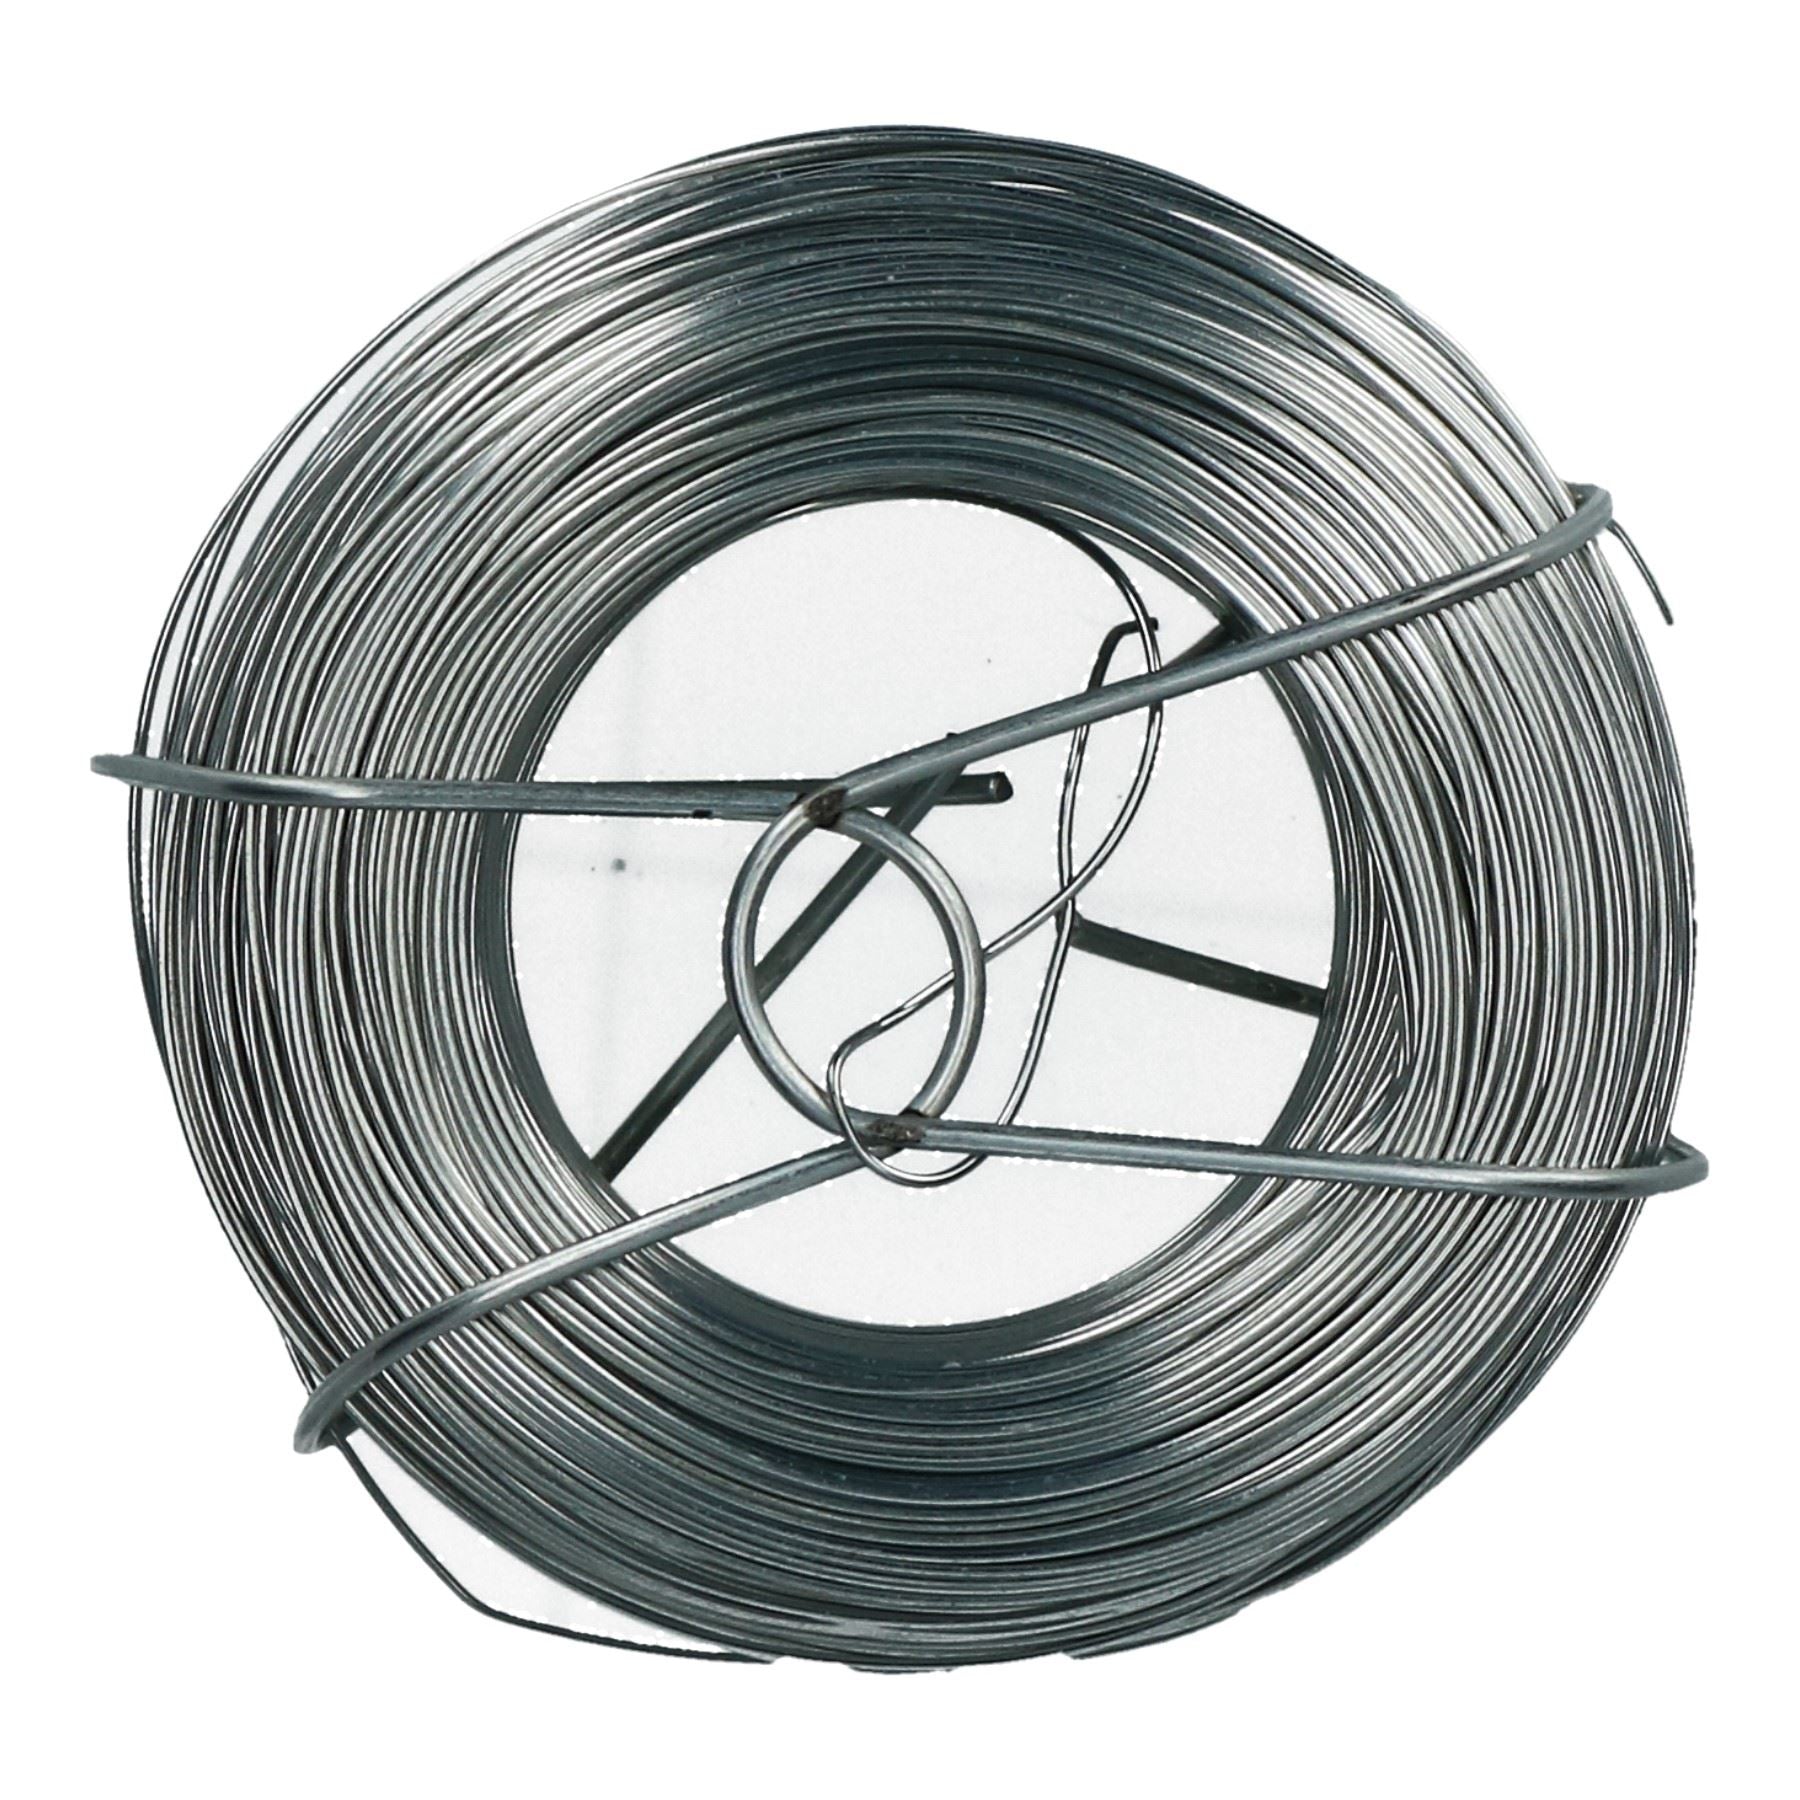 Zinc Plated Wire Roll Hanging Pictures Garden Wire 125 metres x 0.7mm Thick